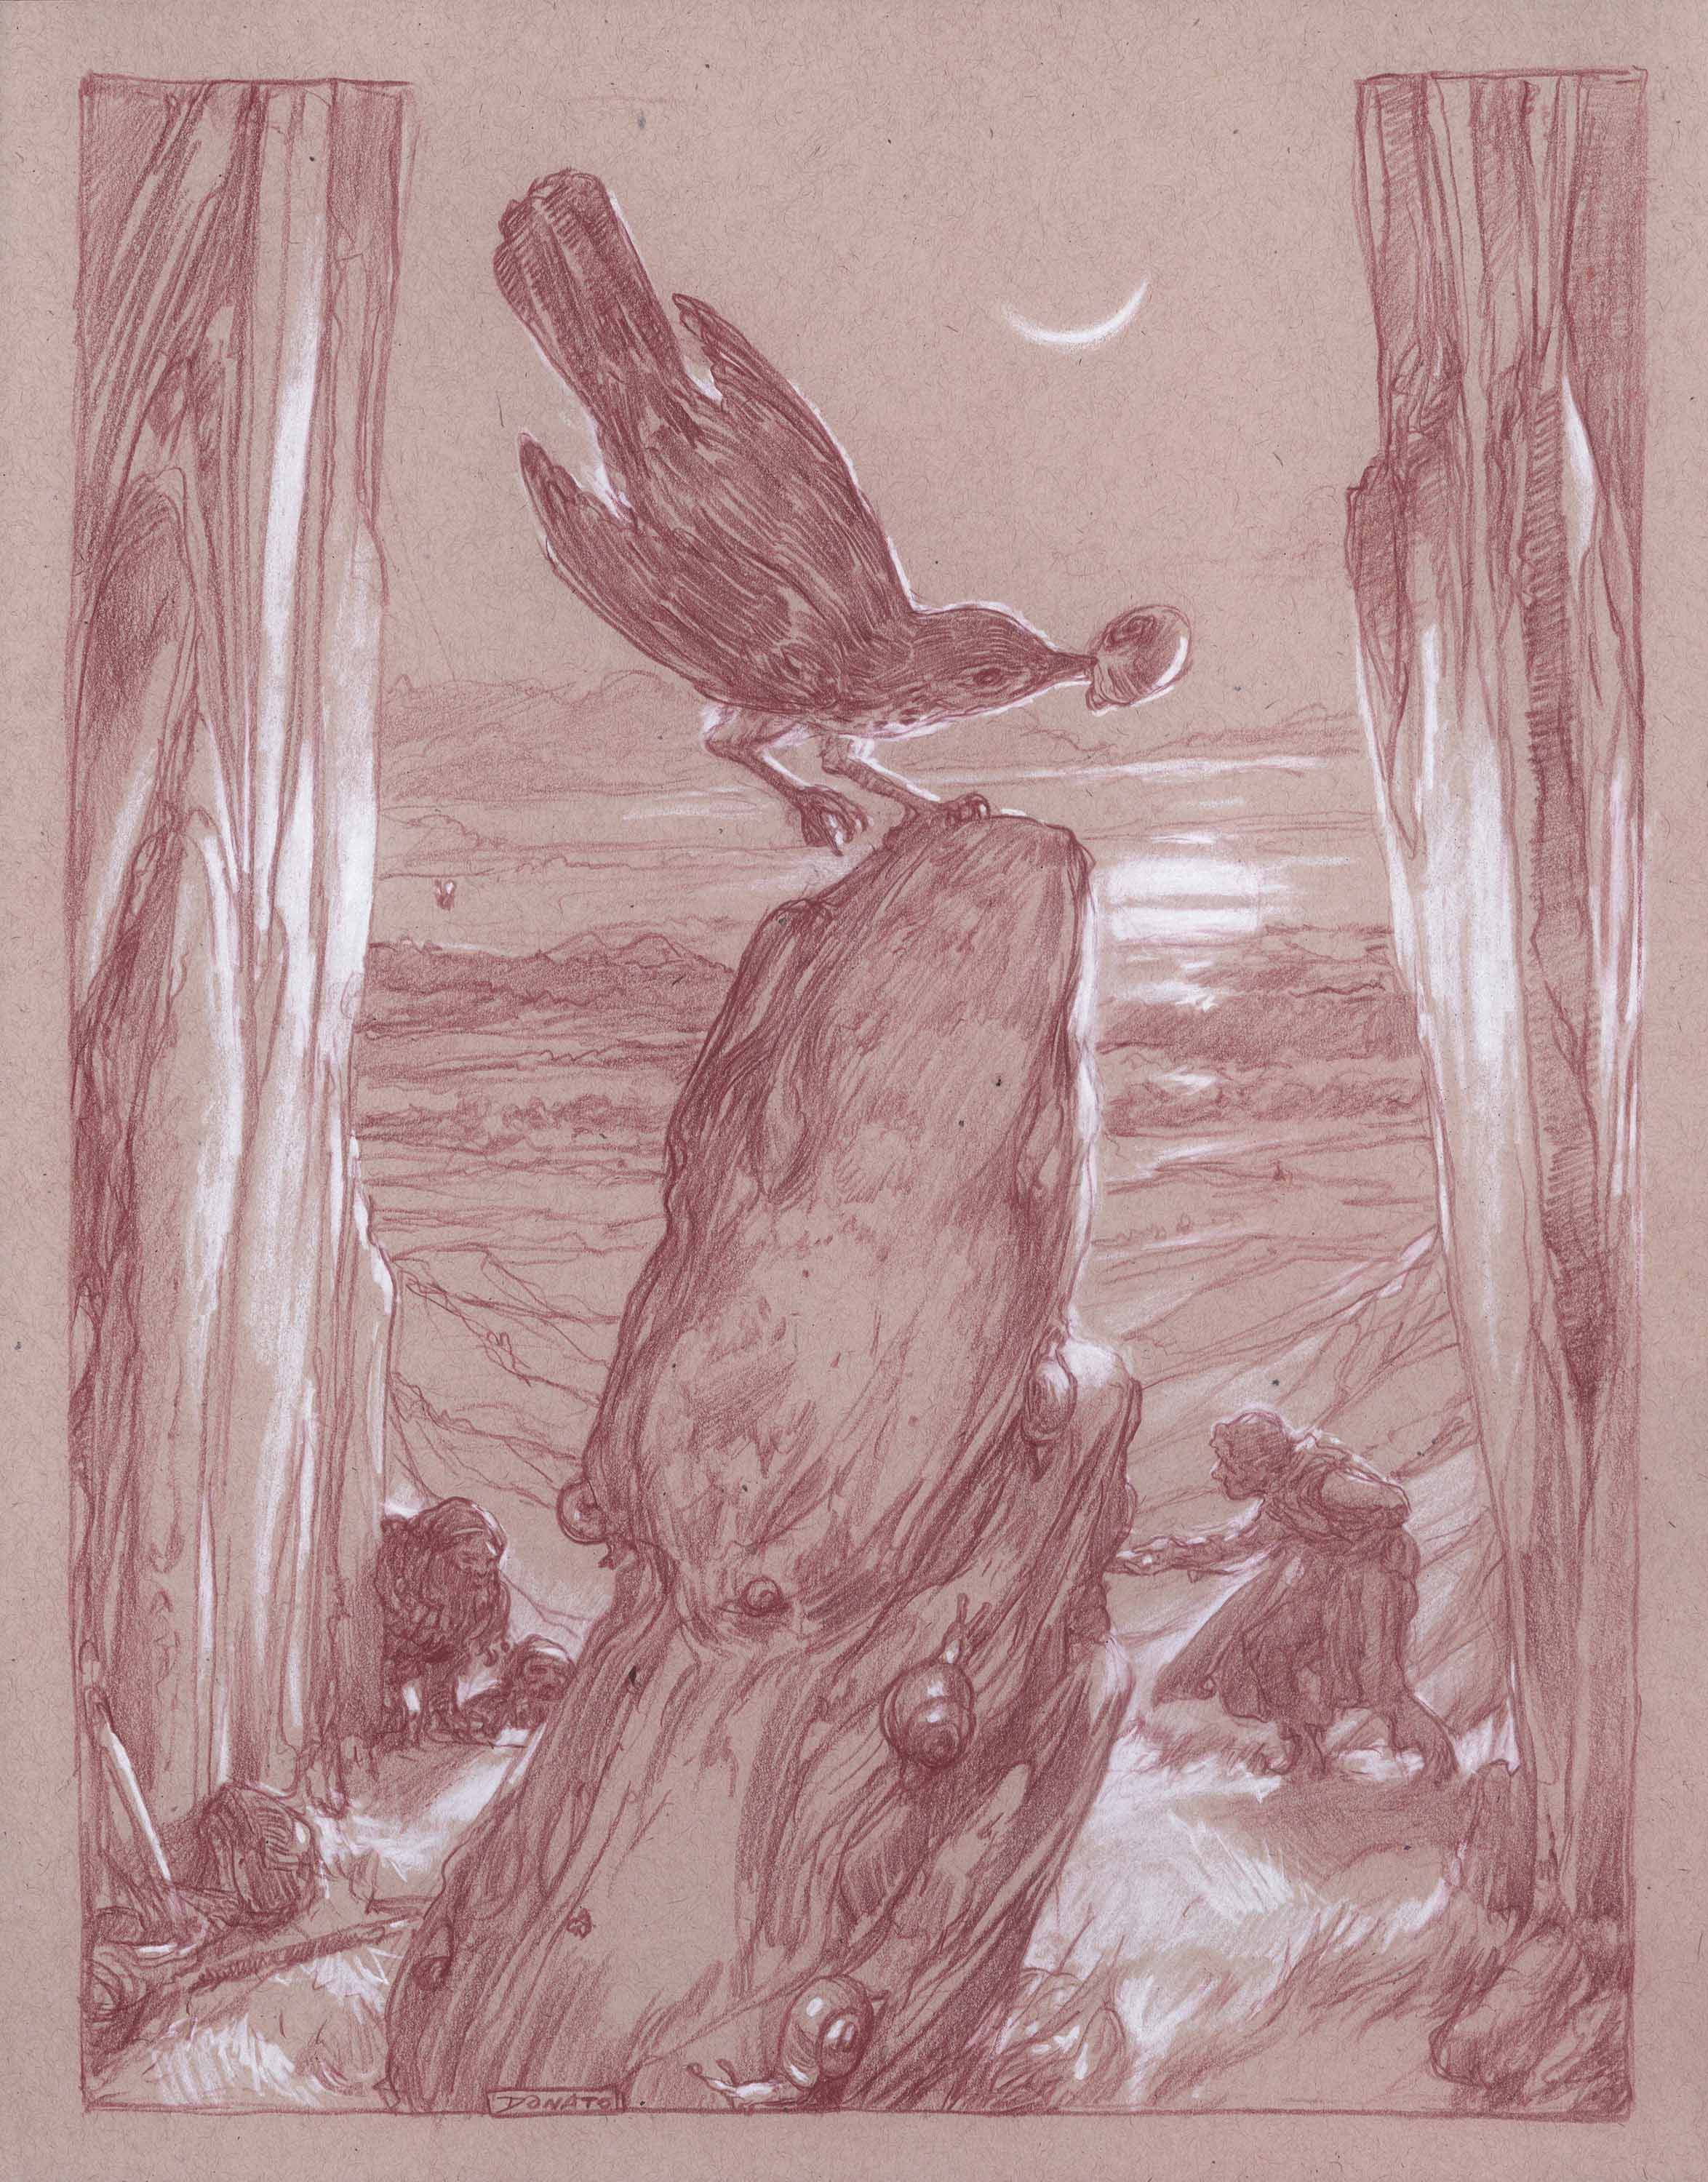 When the Thrush Knocks
14" x 11"  Watercolor Pencil and Chalk on Toned paper 2015
private collection